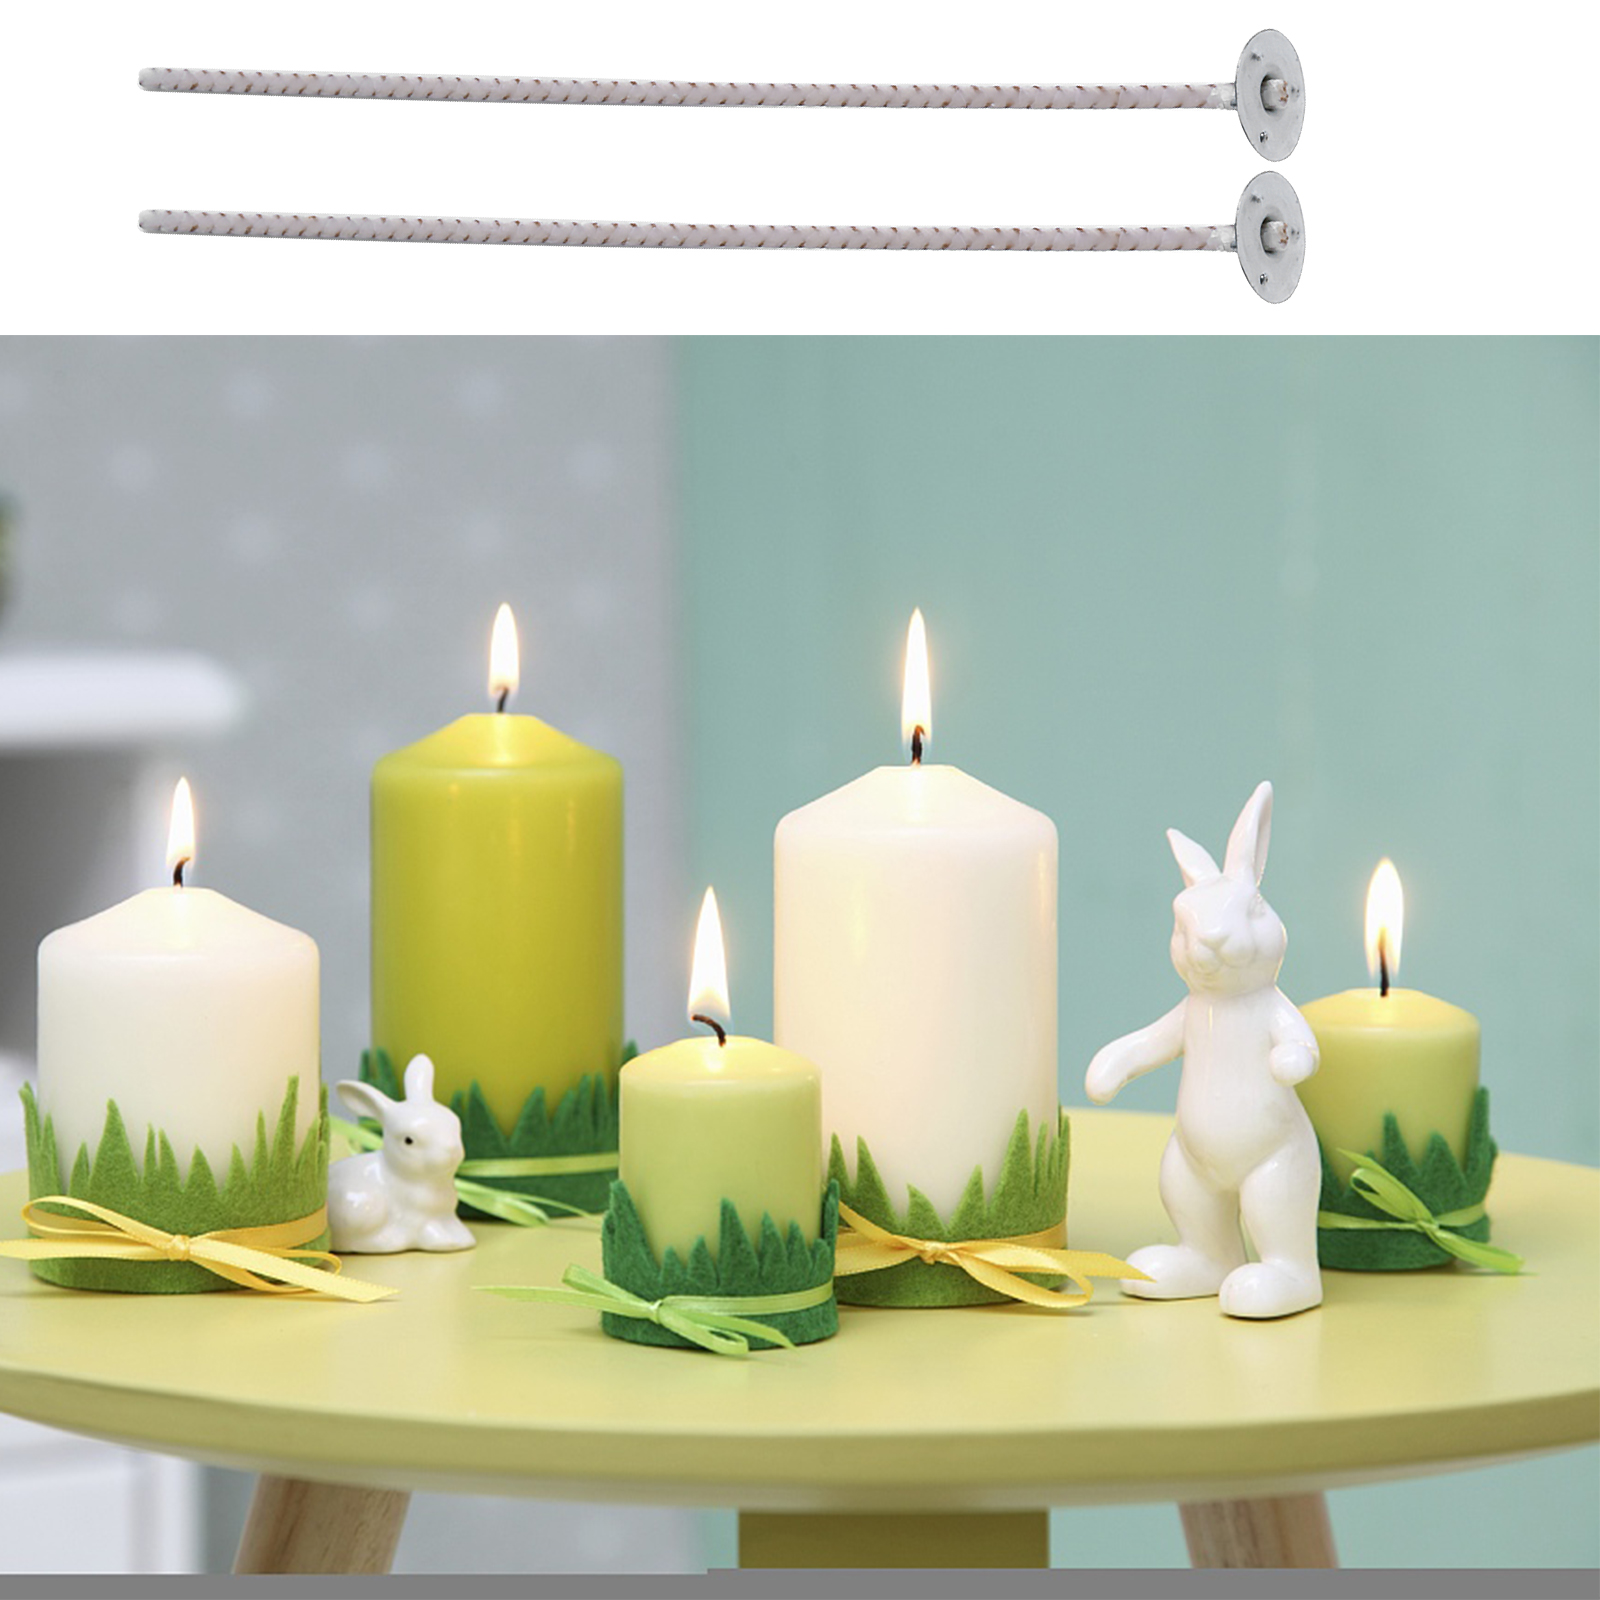 50pcs Candle Wood Wick With Sustainer Tab Candle For Diy Candle